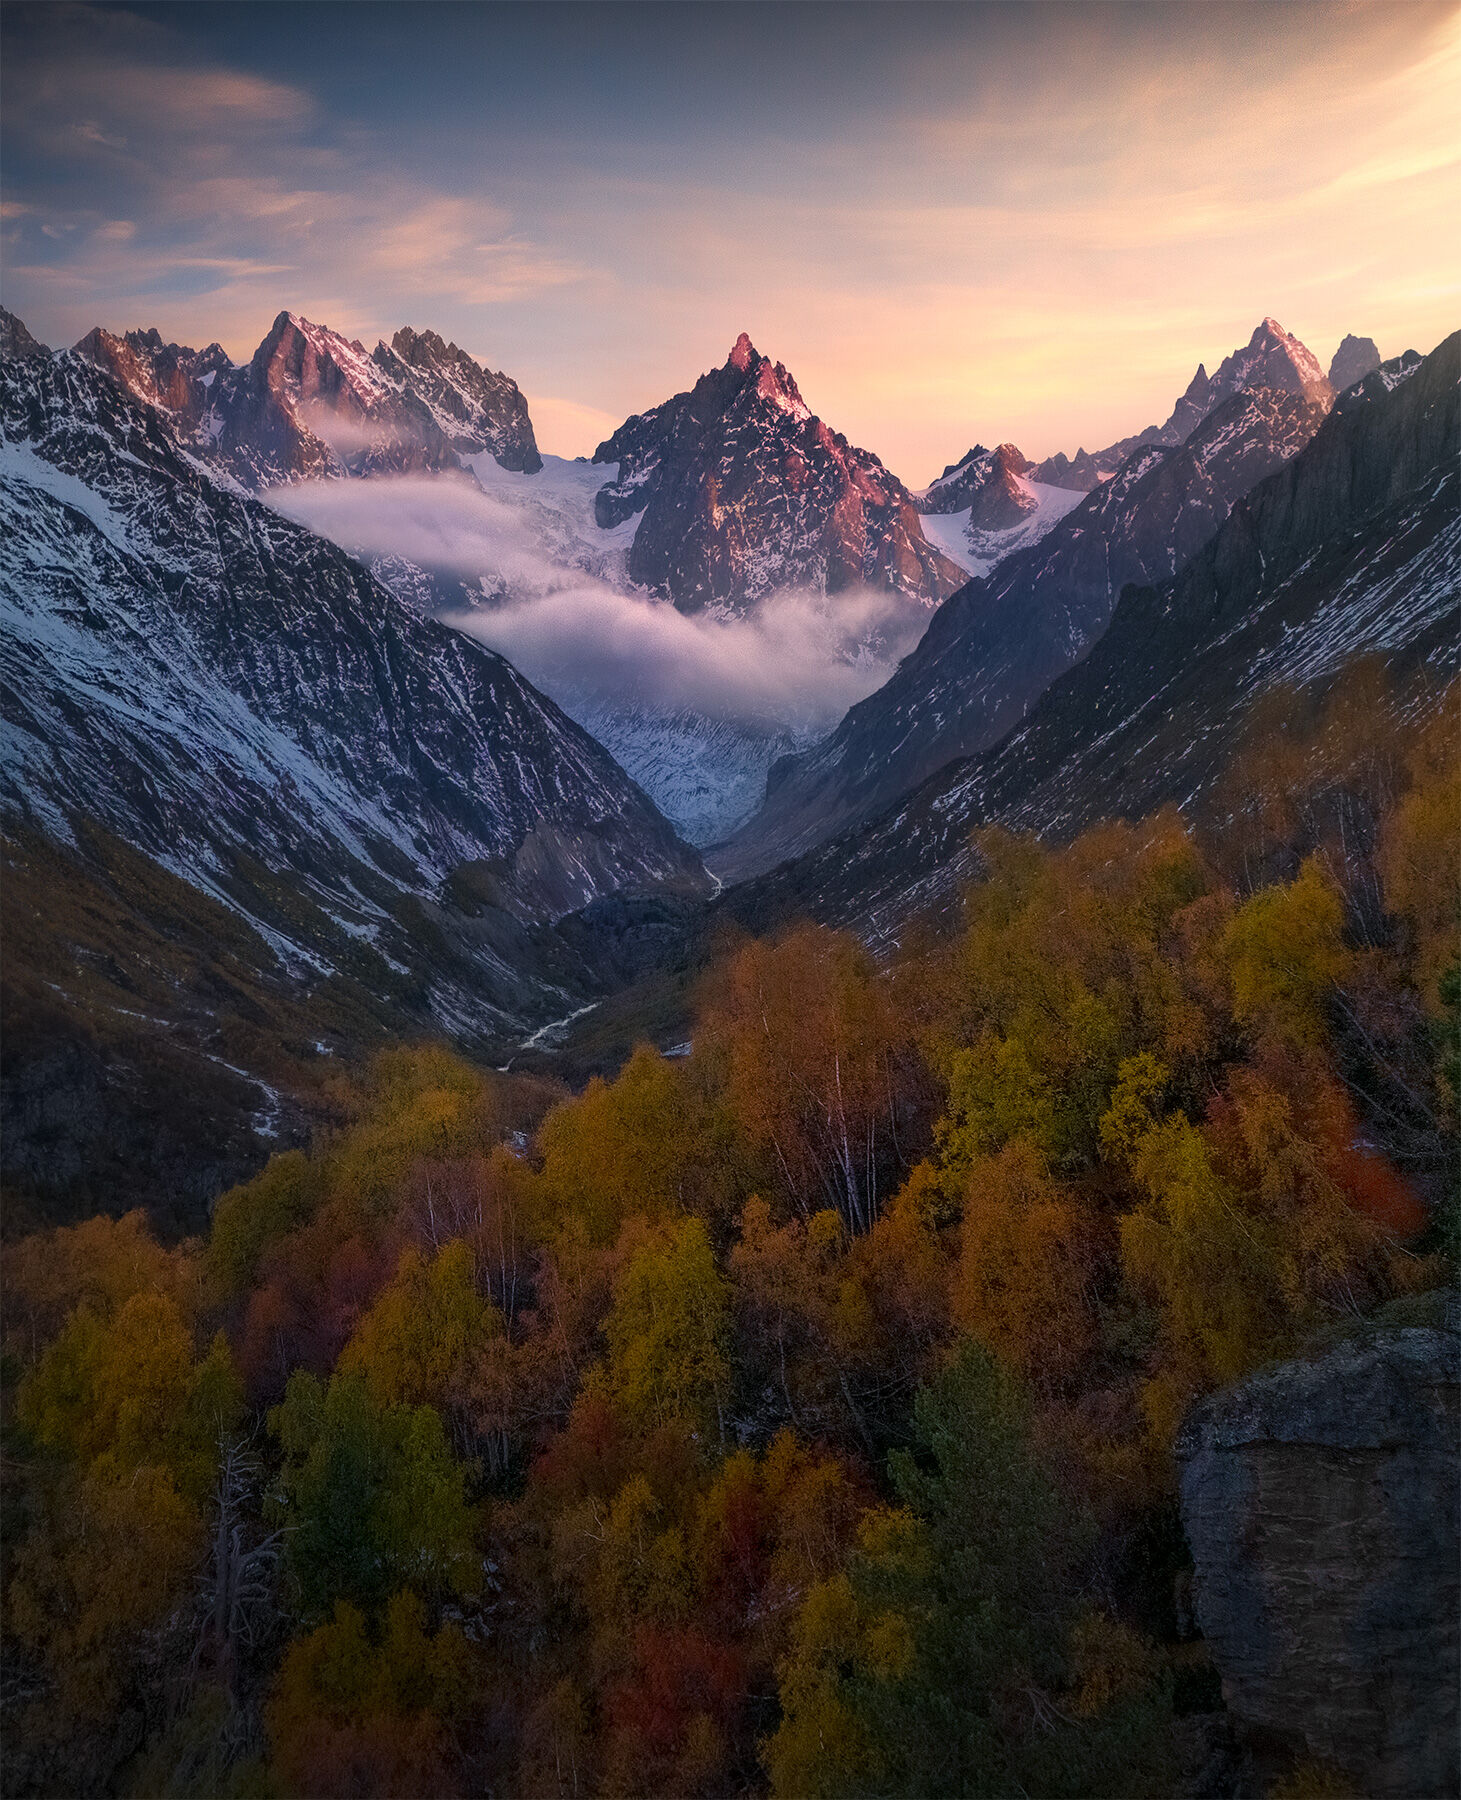 Layers of rich fall colors as soft light falls on the high peaks of the Caucasus range in Georgia.